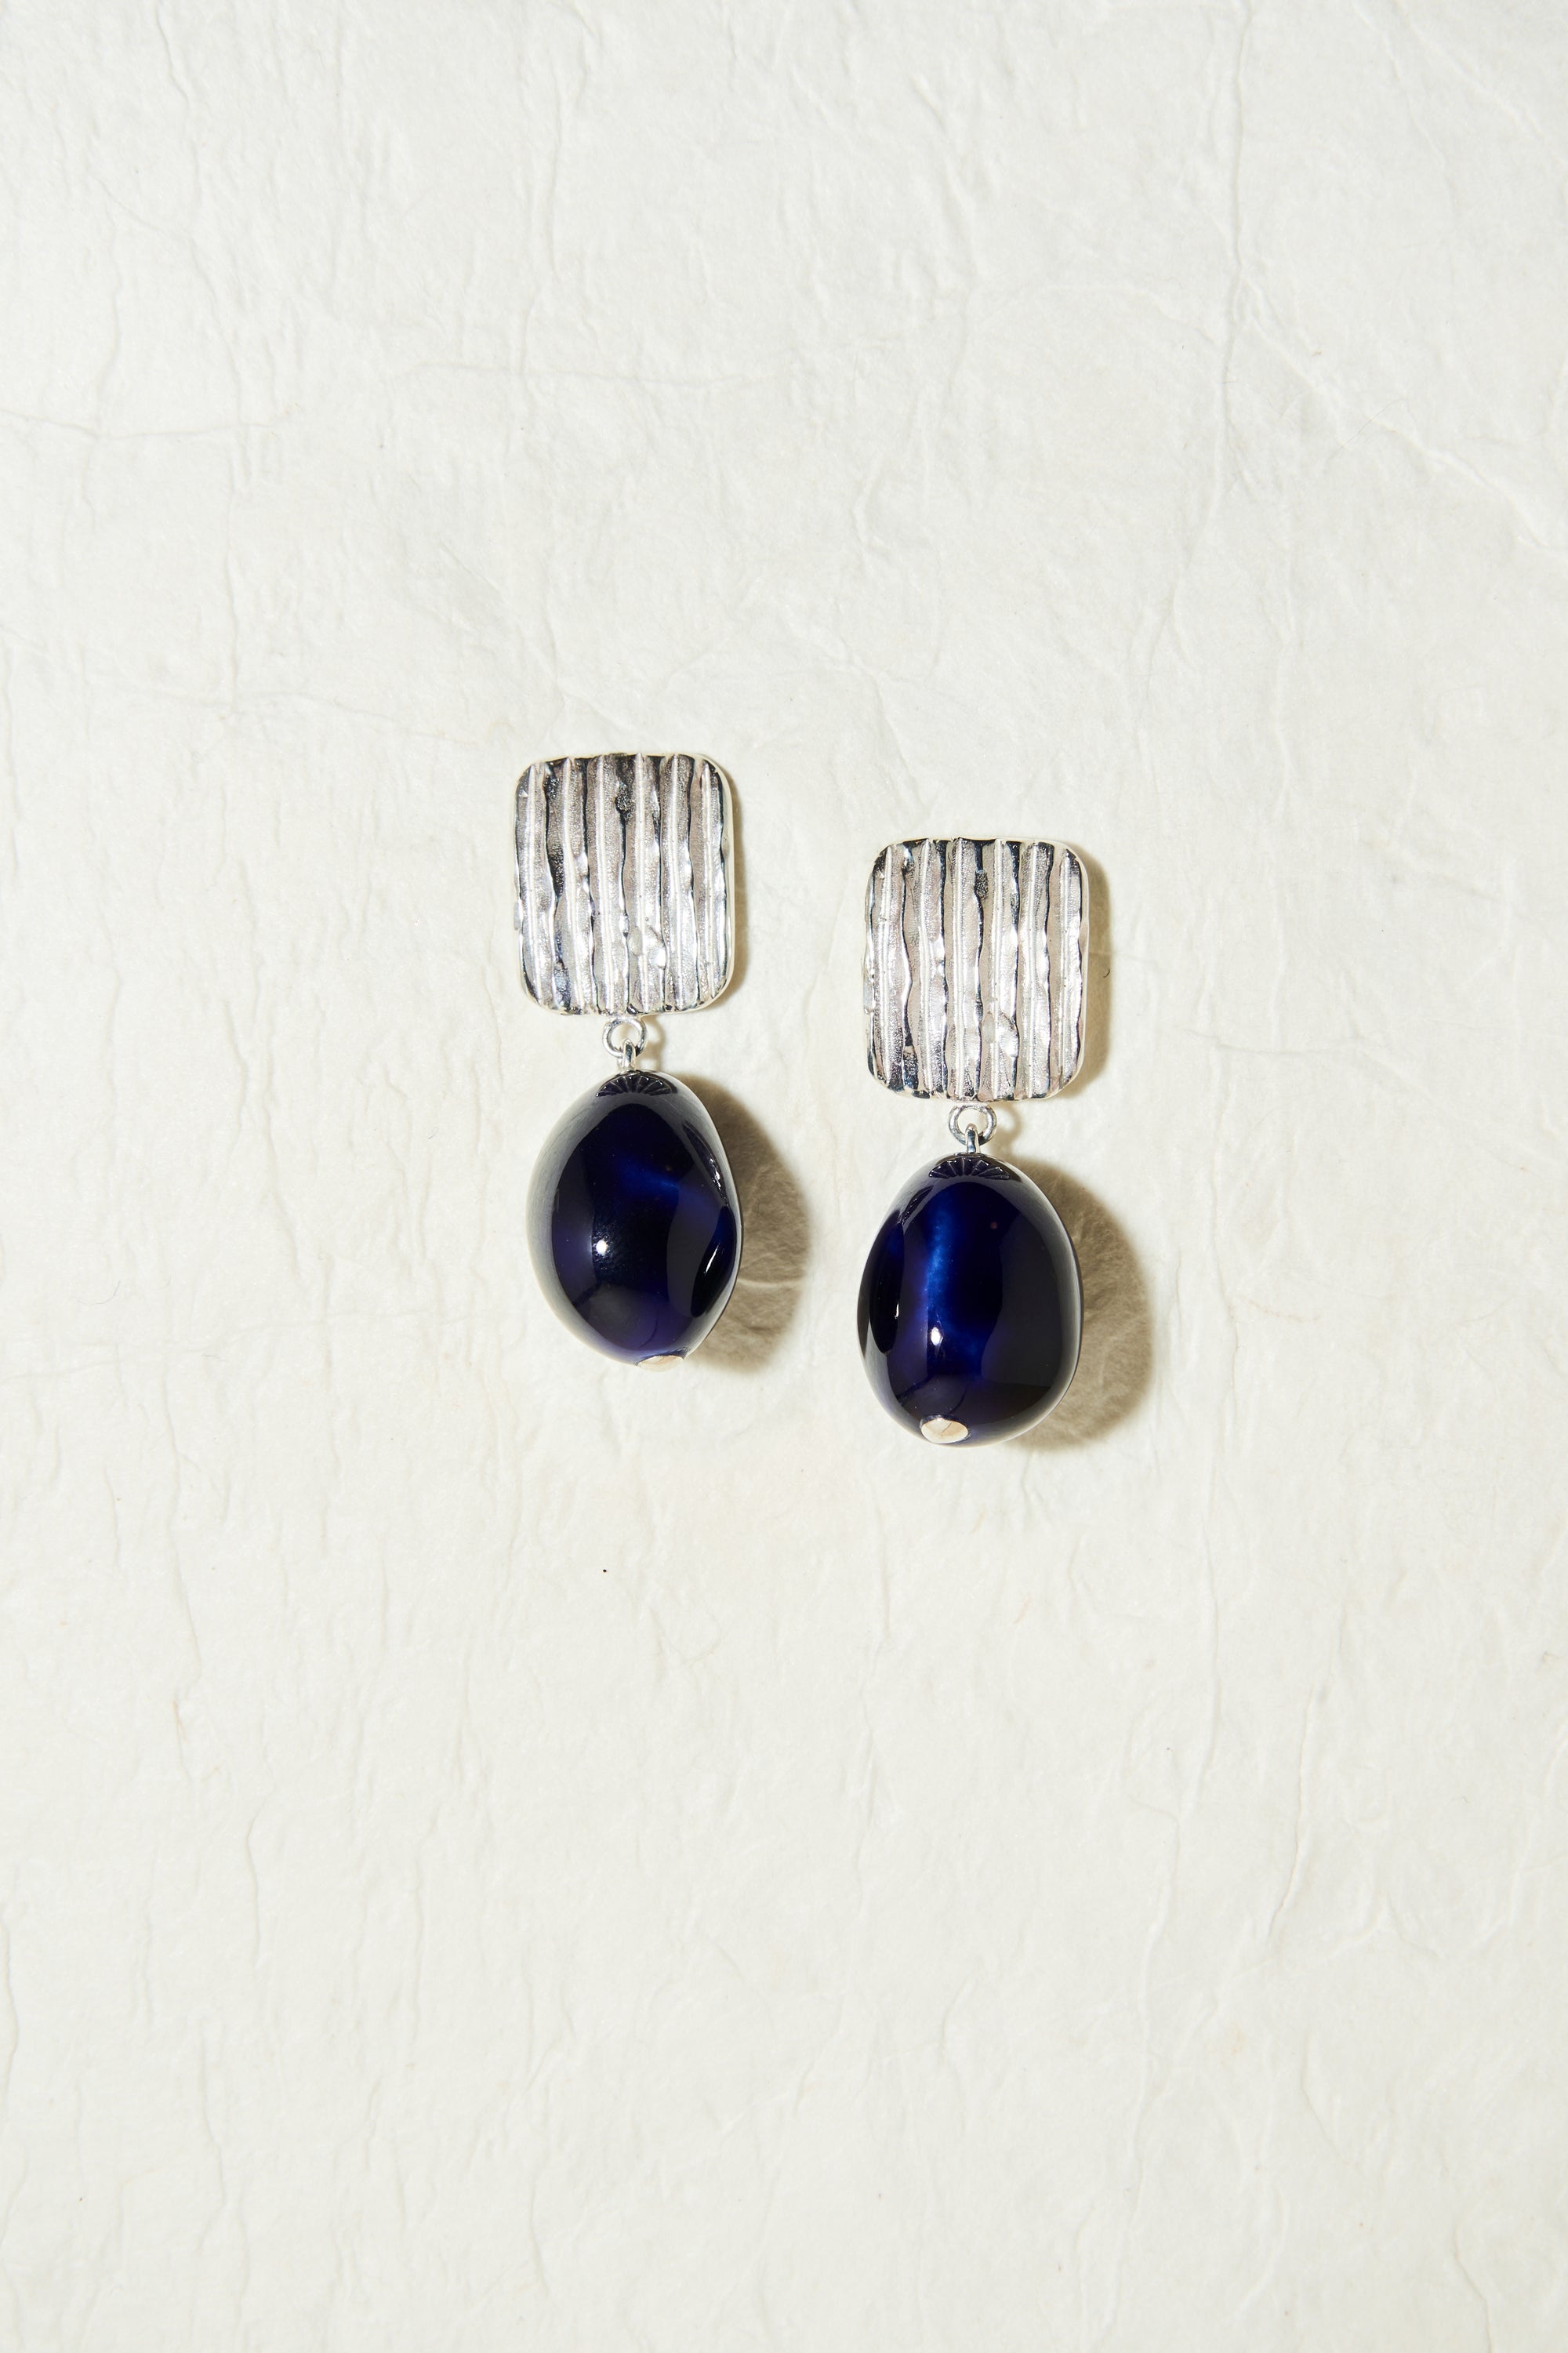 THE MISHA NAVY EARRINGS IN SILVER